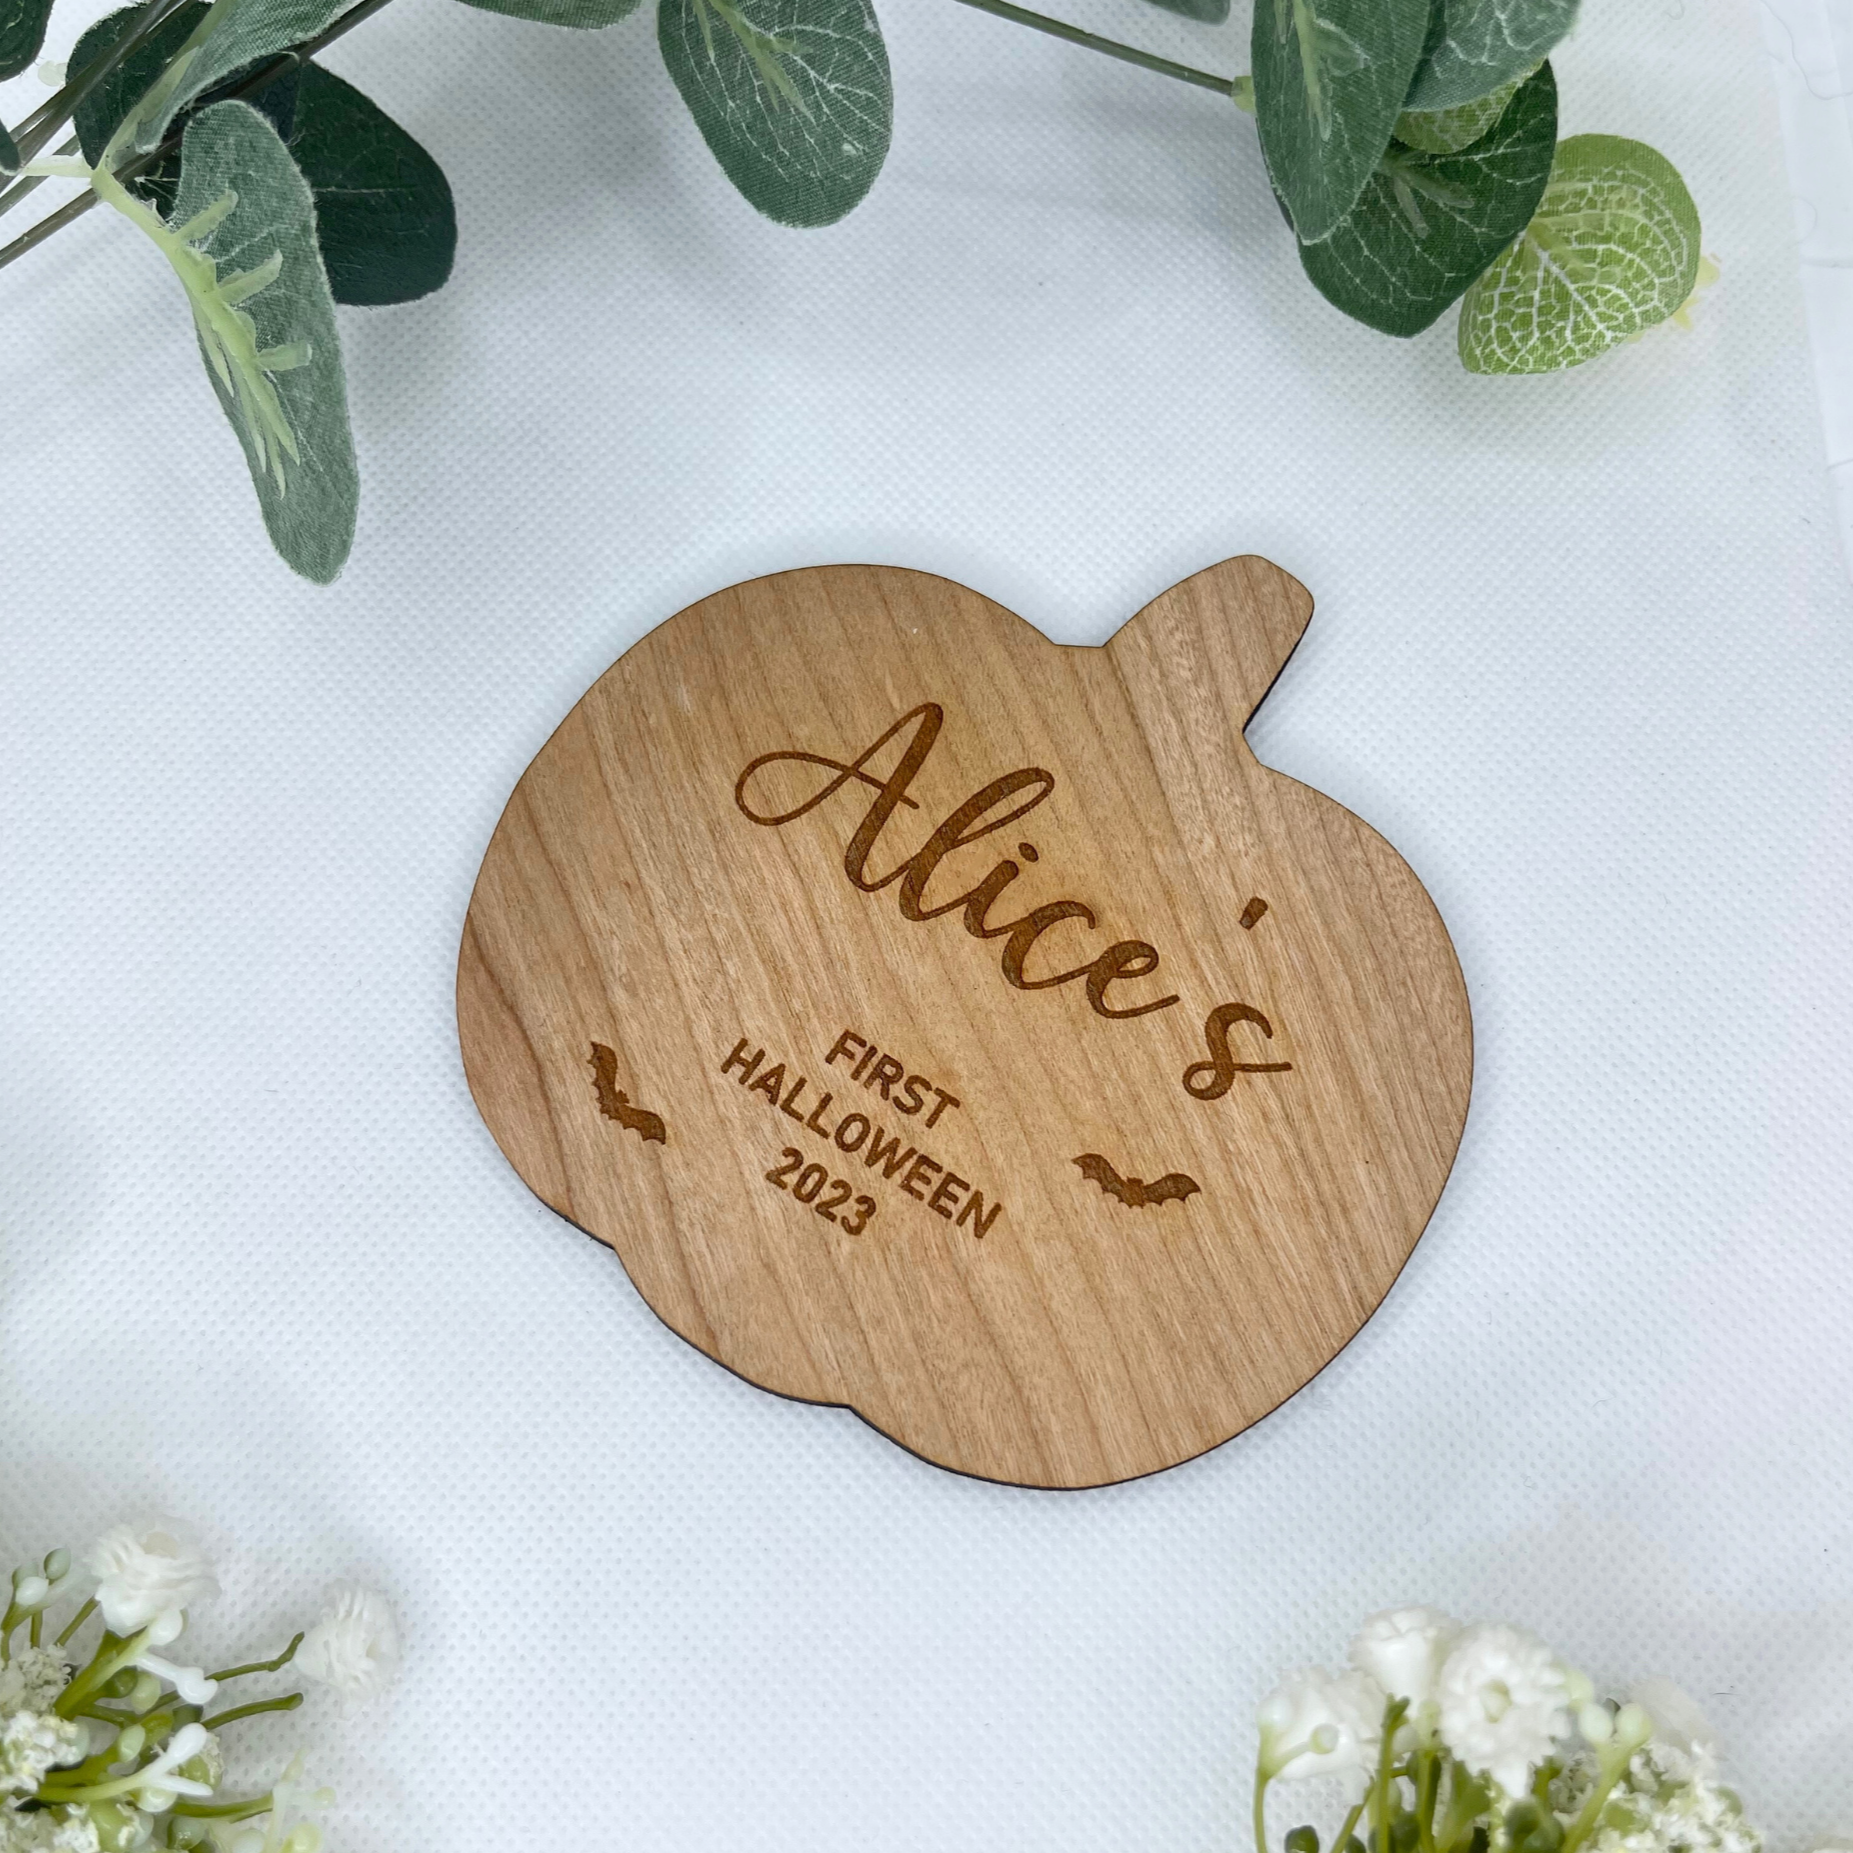 A 15x15cm custom pumpkin-shaped baby's first Halloween plaque, meticulously carved from cherry wood. The plaque features the adorable engraving of bats and can be personalised with your baby's first name. This 4mm thick keepsake beautifully captures the essence of your little one's inaugural Halloween, preserving the memory for years to come.